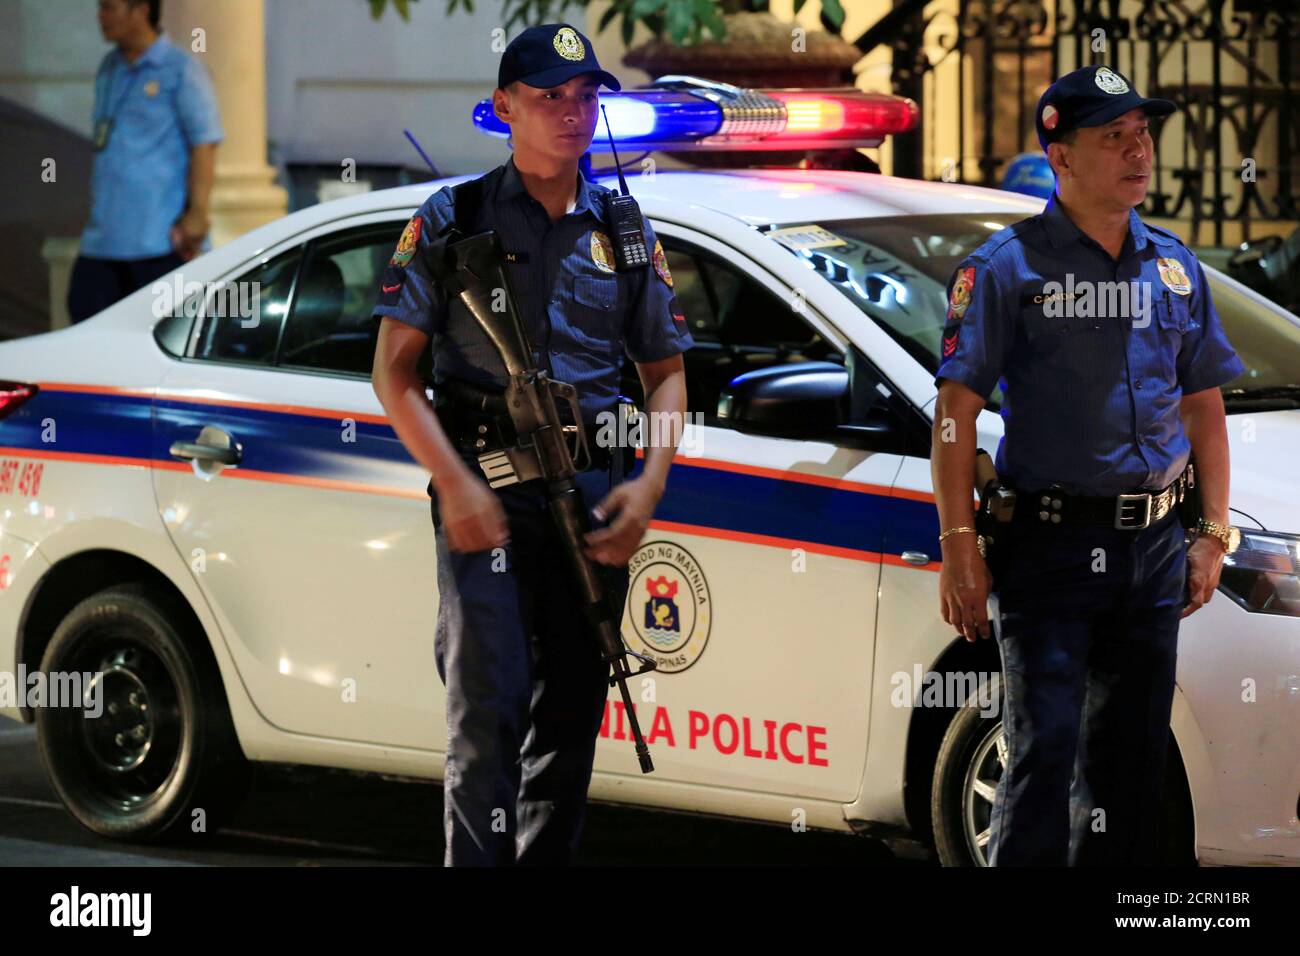 Members of the Philippine National Police (PNP) stand guard beside their  mobile patrol along a main street of metro Manila in the Philippines May  12, 2016. REUTERS/Romeo Ranoco Stock Photo - Alamy